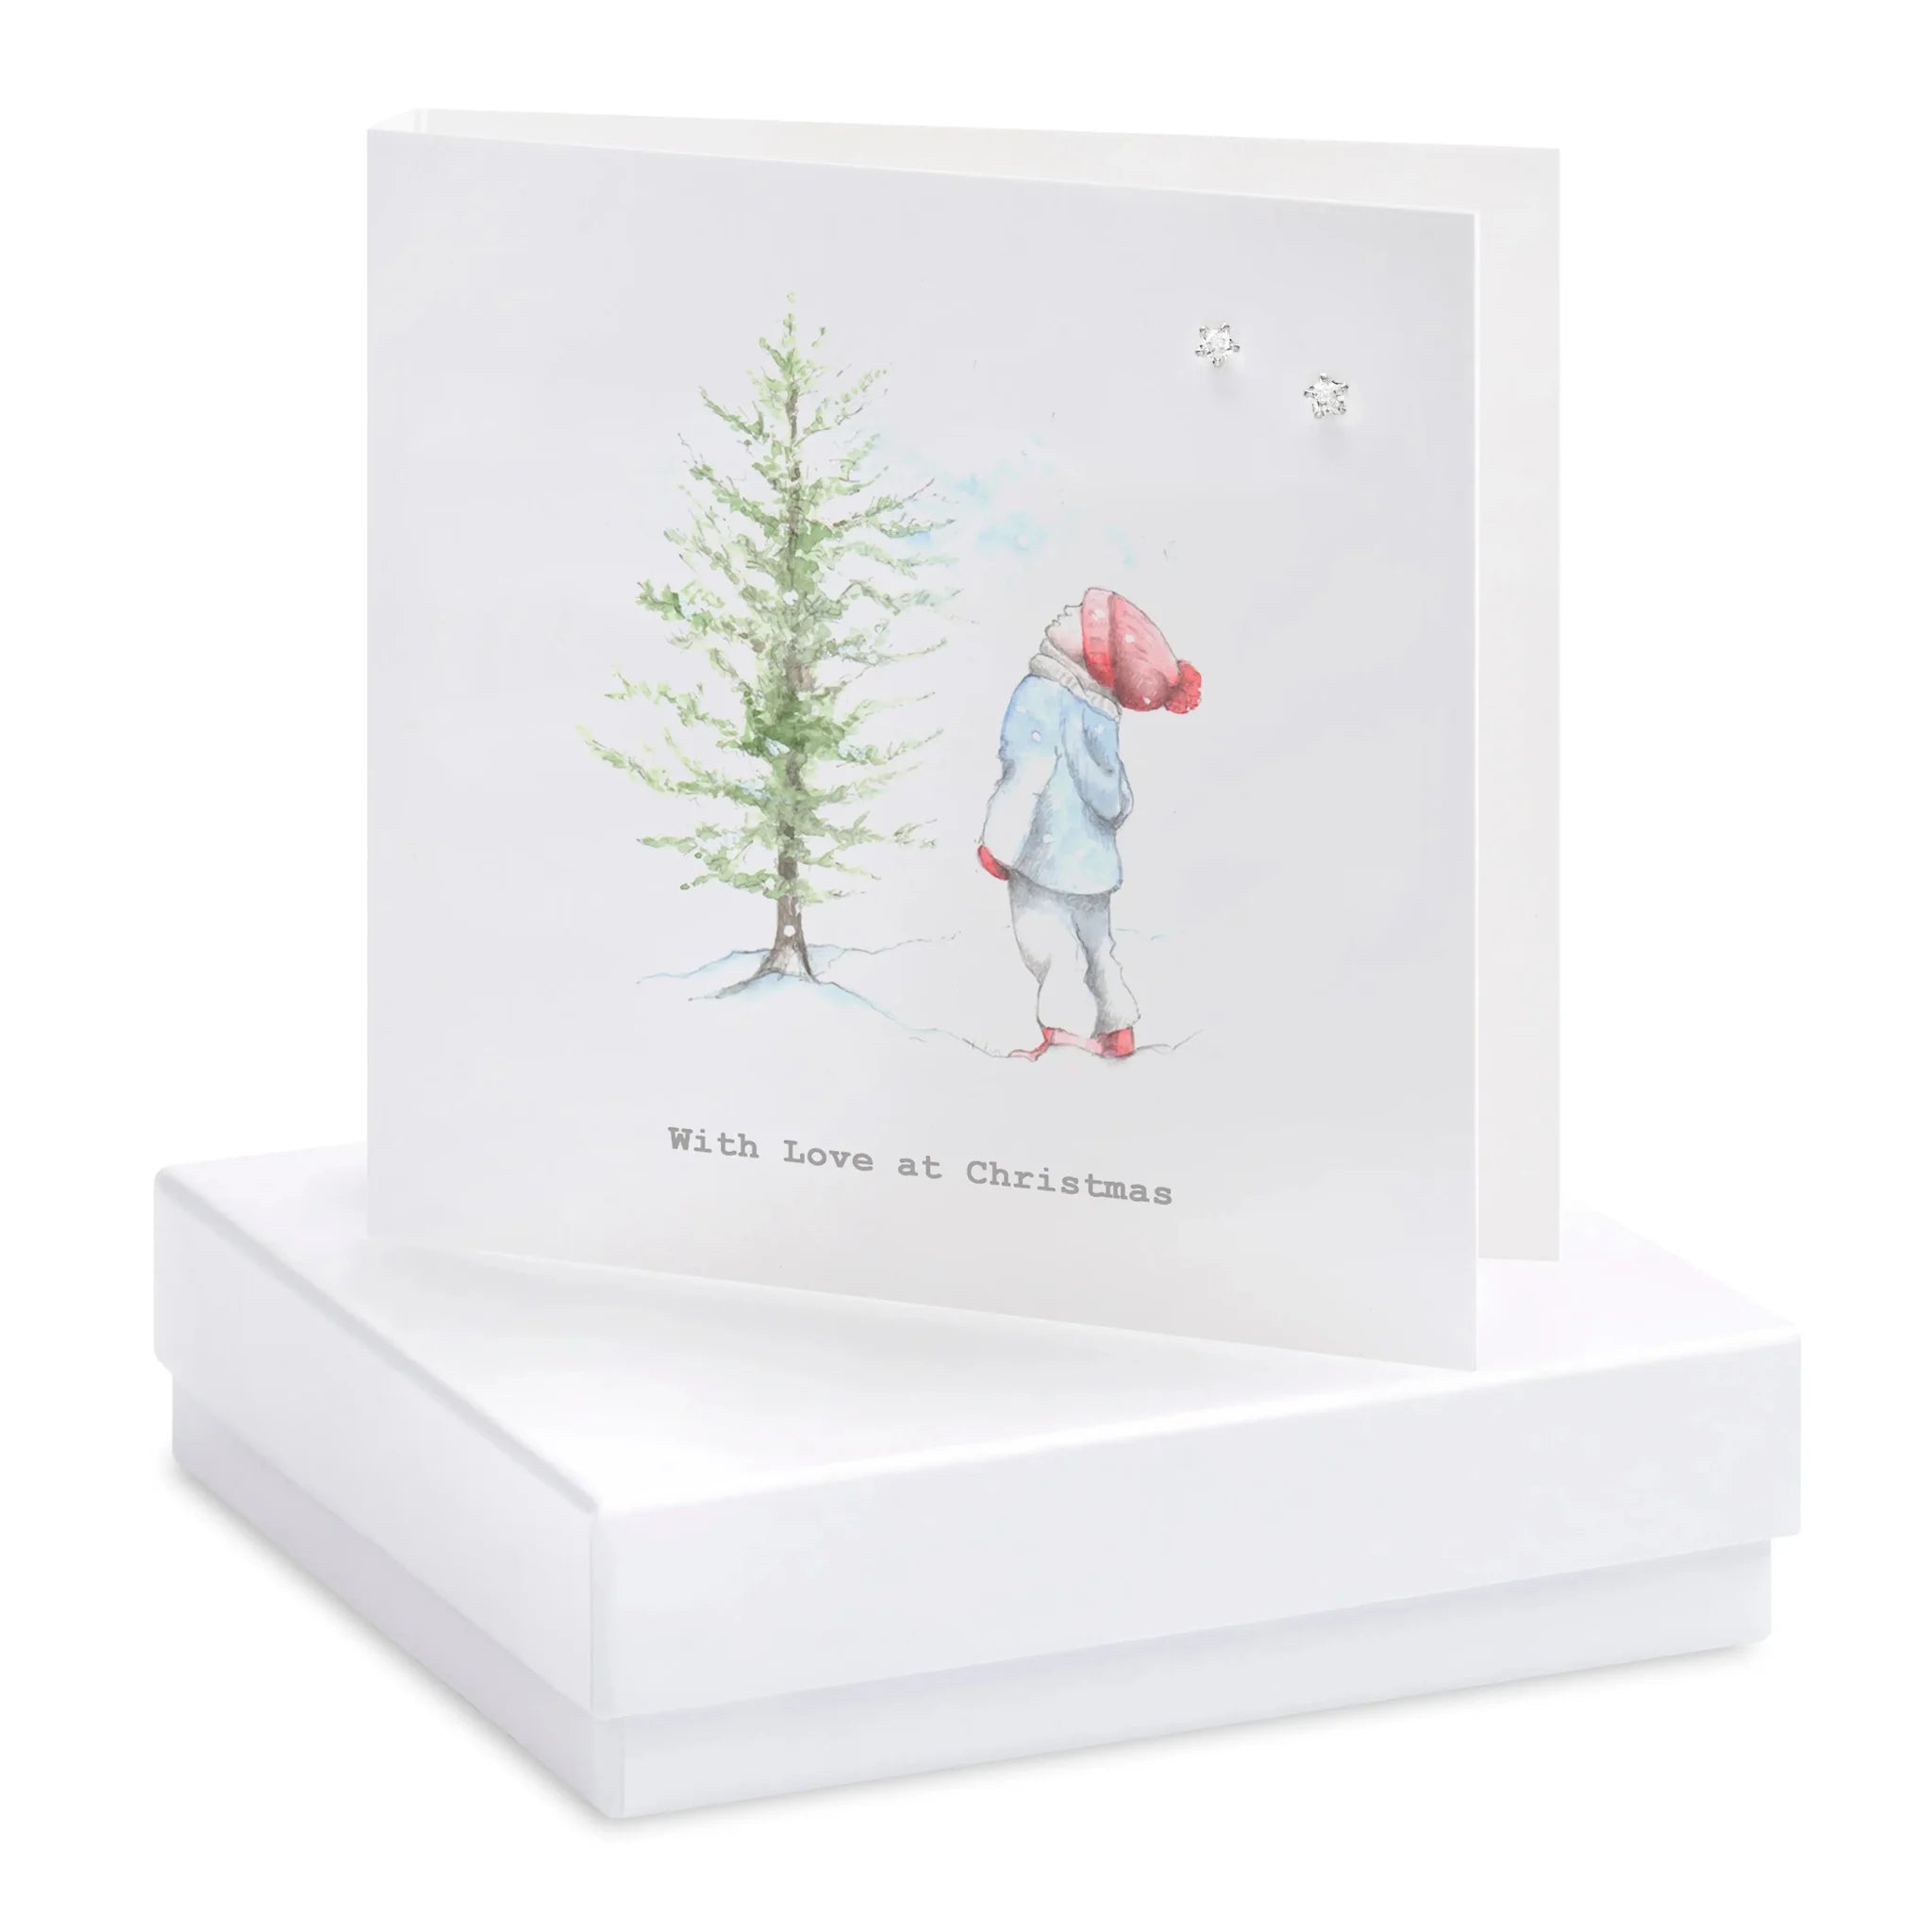 Crumble & Core | Christmas Scene Card with Earrings in a White Box by Weirs of Baggot Street